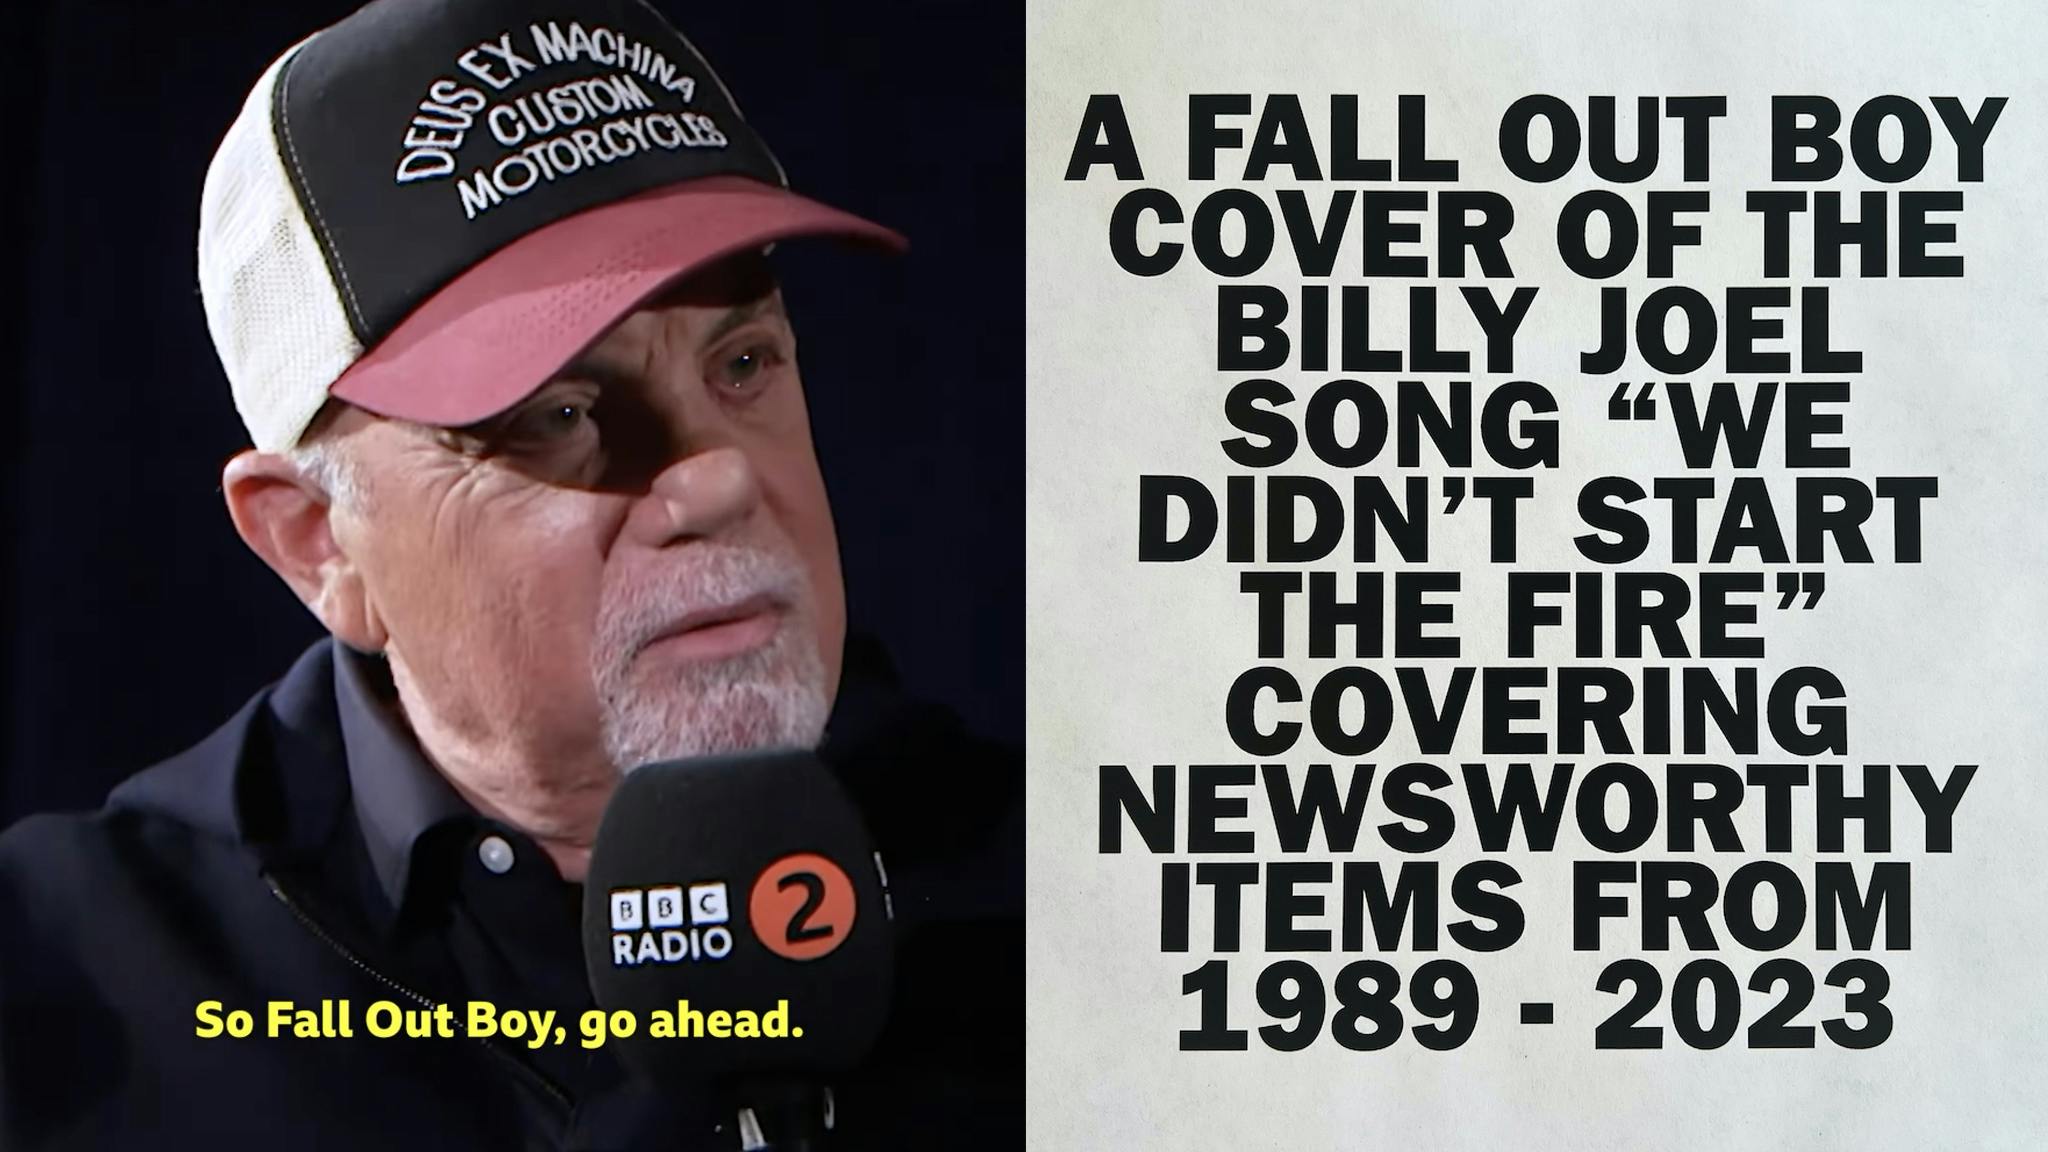 Billy Joel responds to Fall Out Boy’s updated cover of We Didn’t Start The Fire